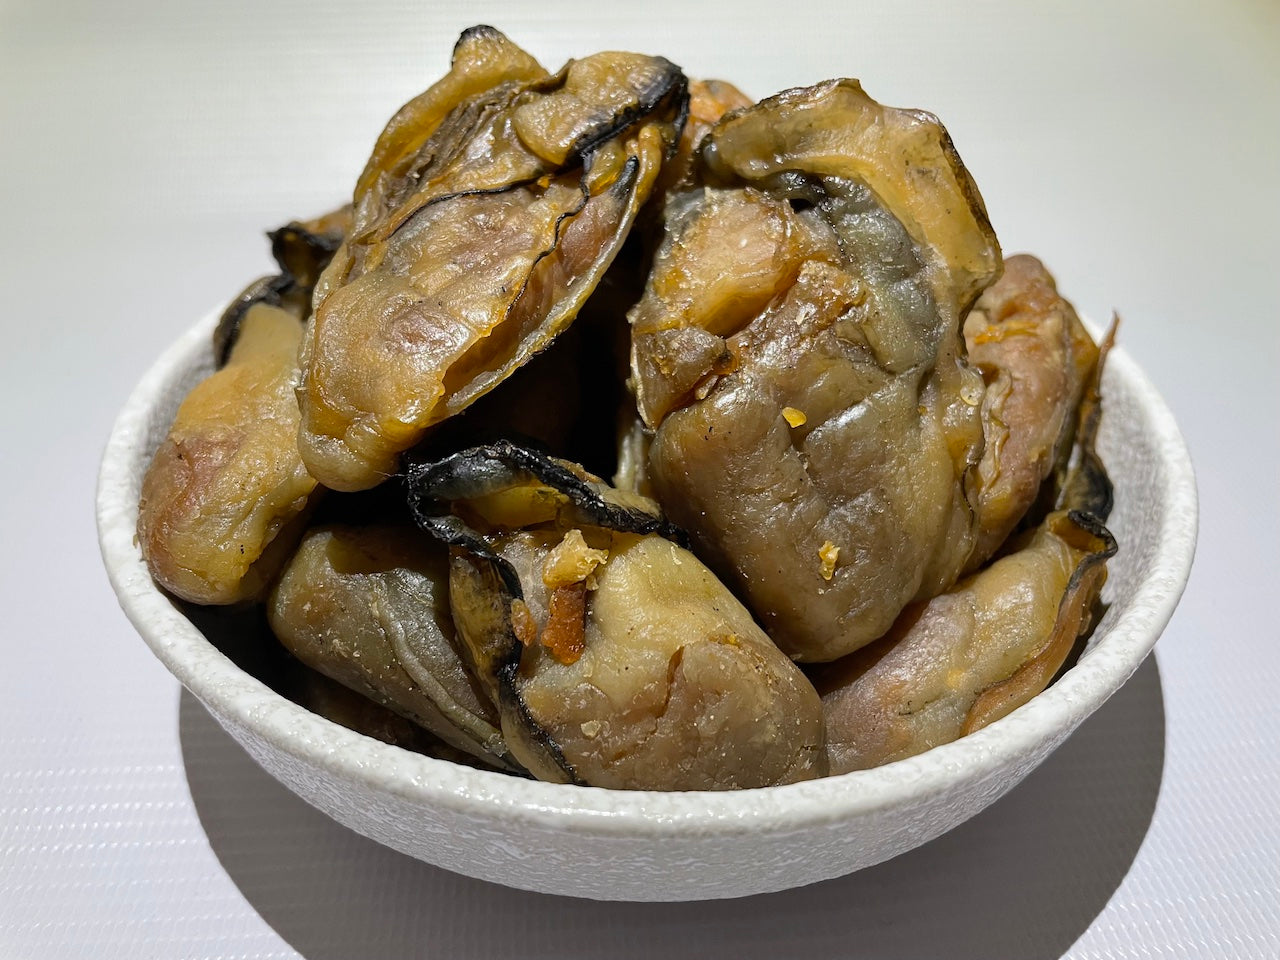 Japanese Top Grade Dried Oyster (LLL Size) 日本特大LLL生晒蚝干 8oz or 16oz